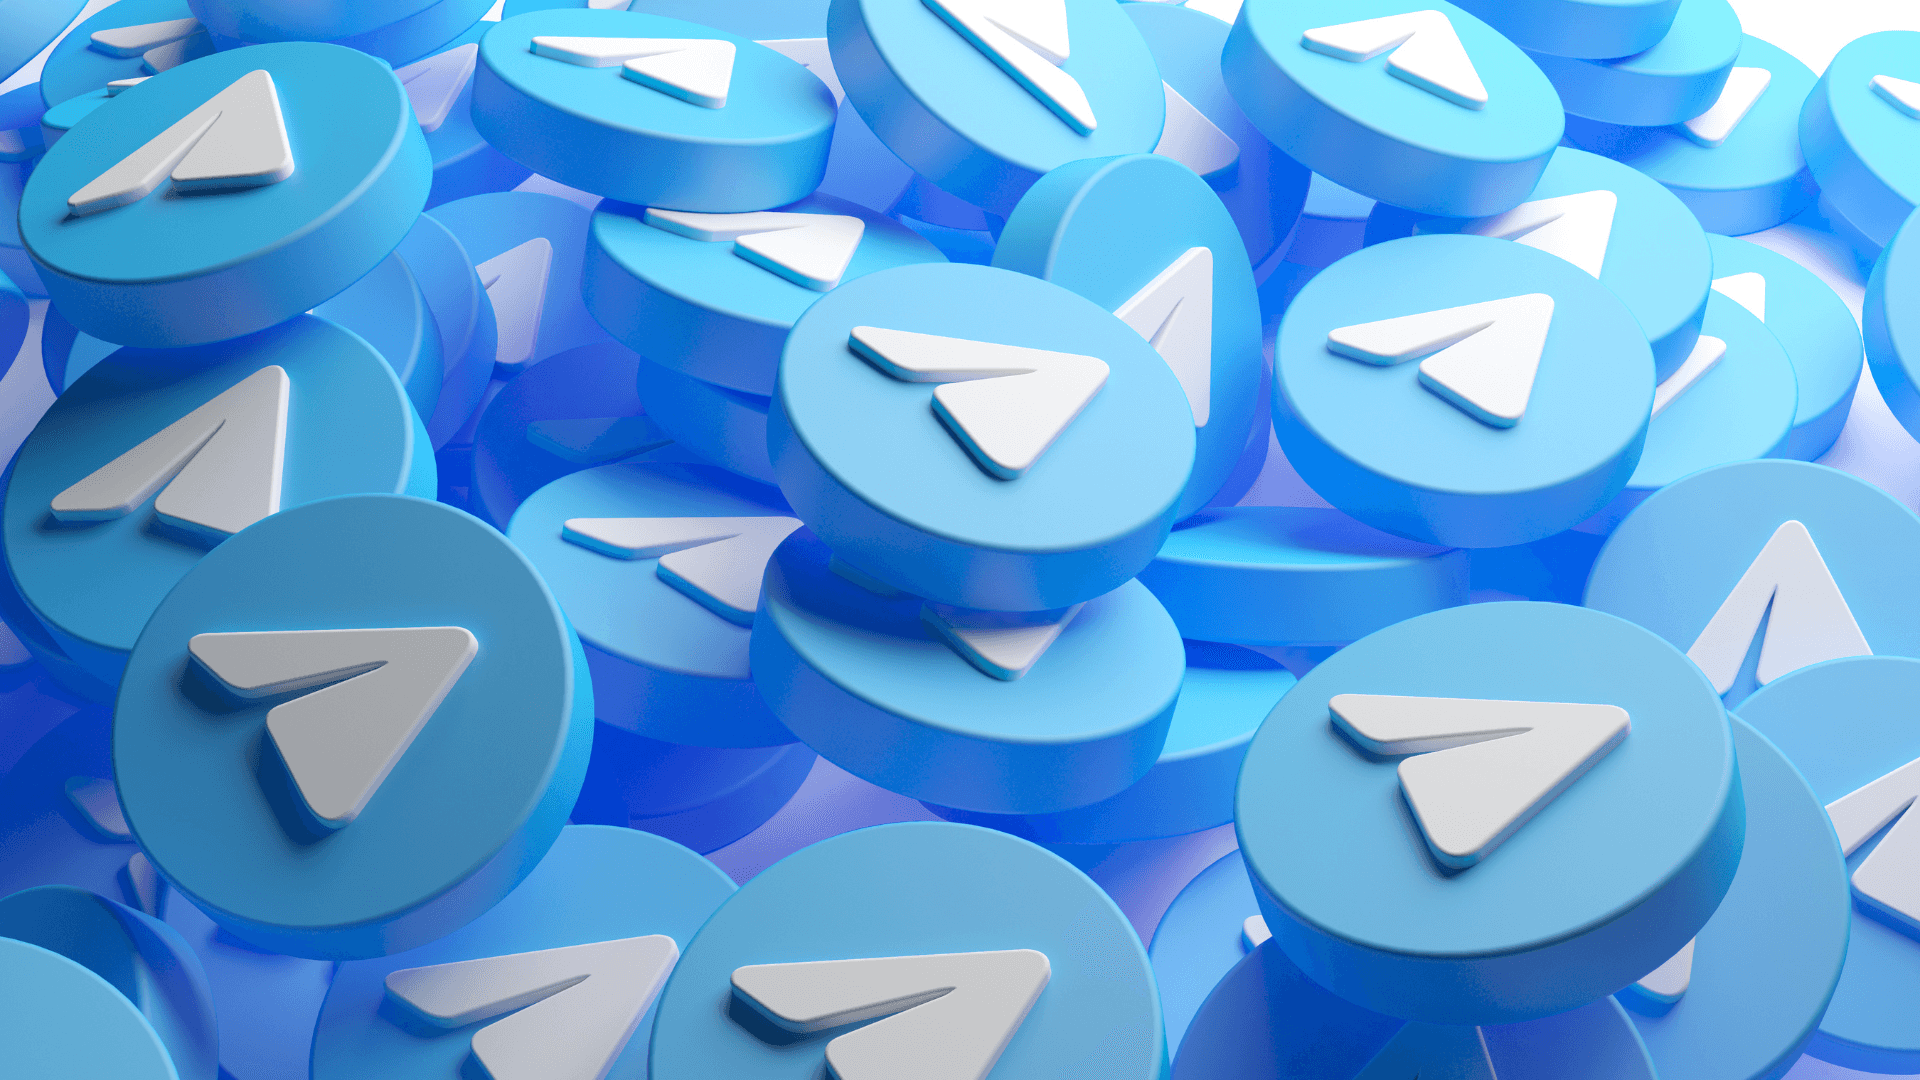 A Group Of Blue And White Telegram Logos